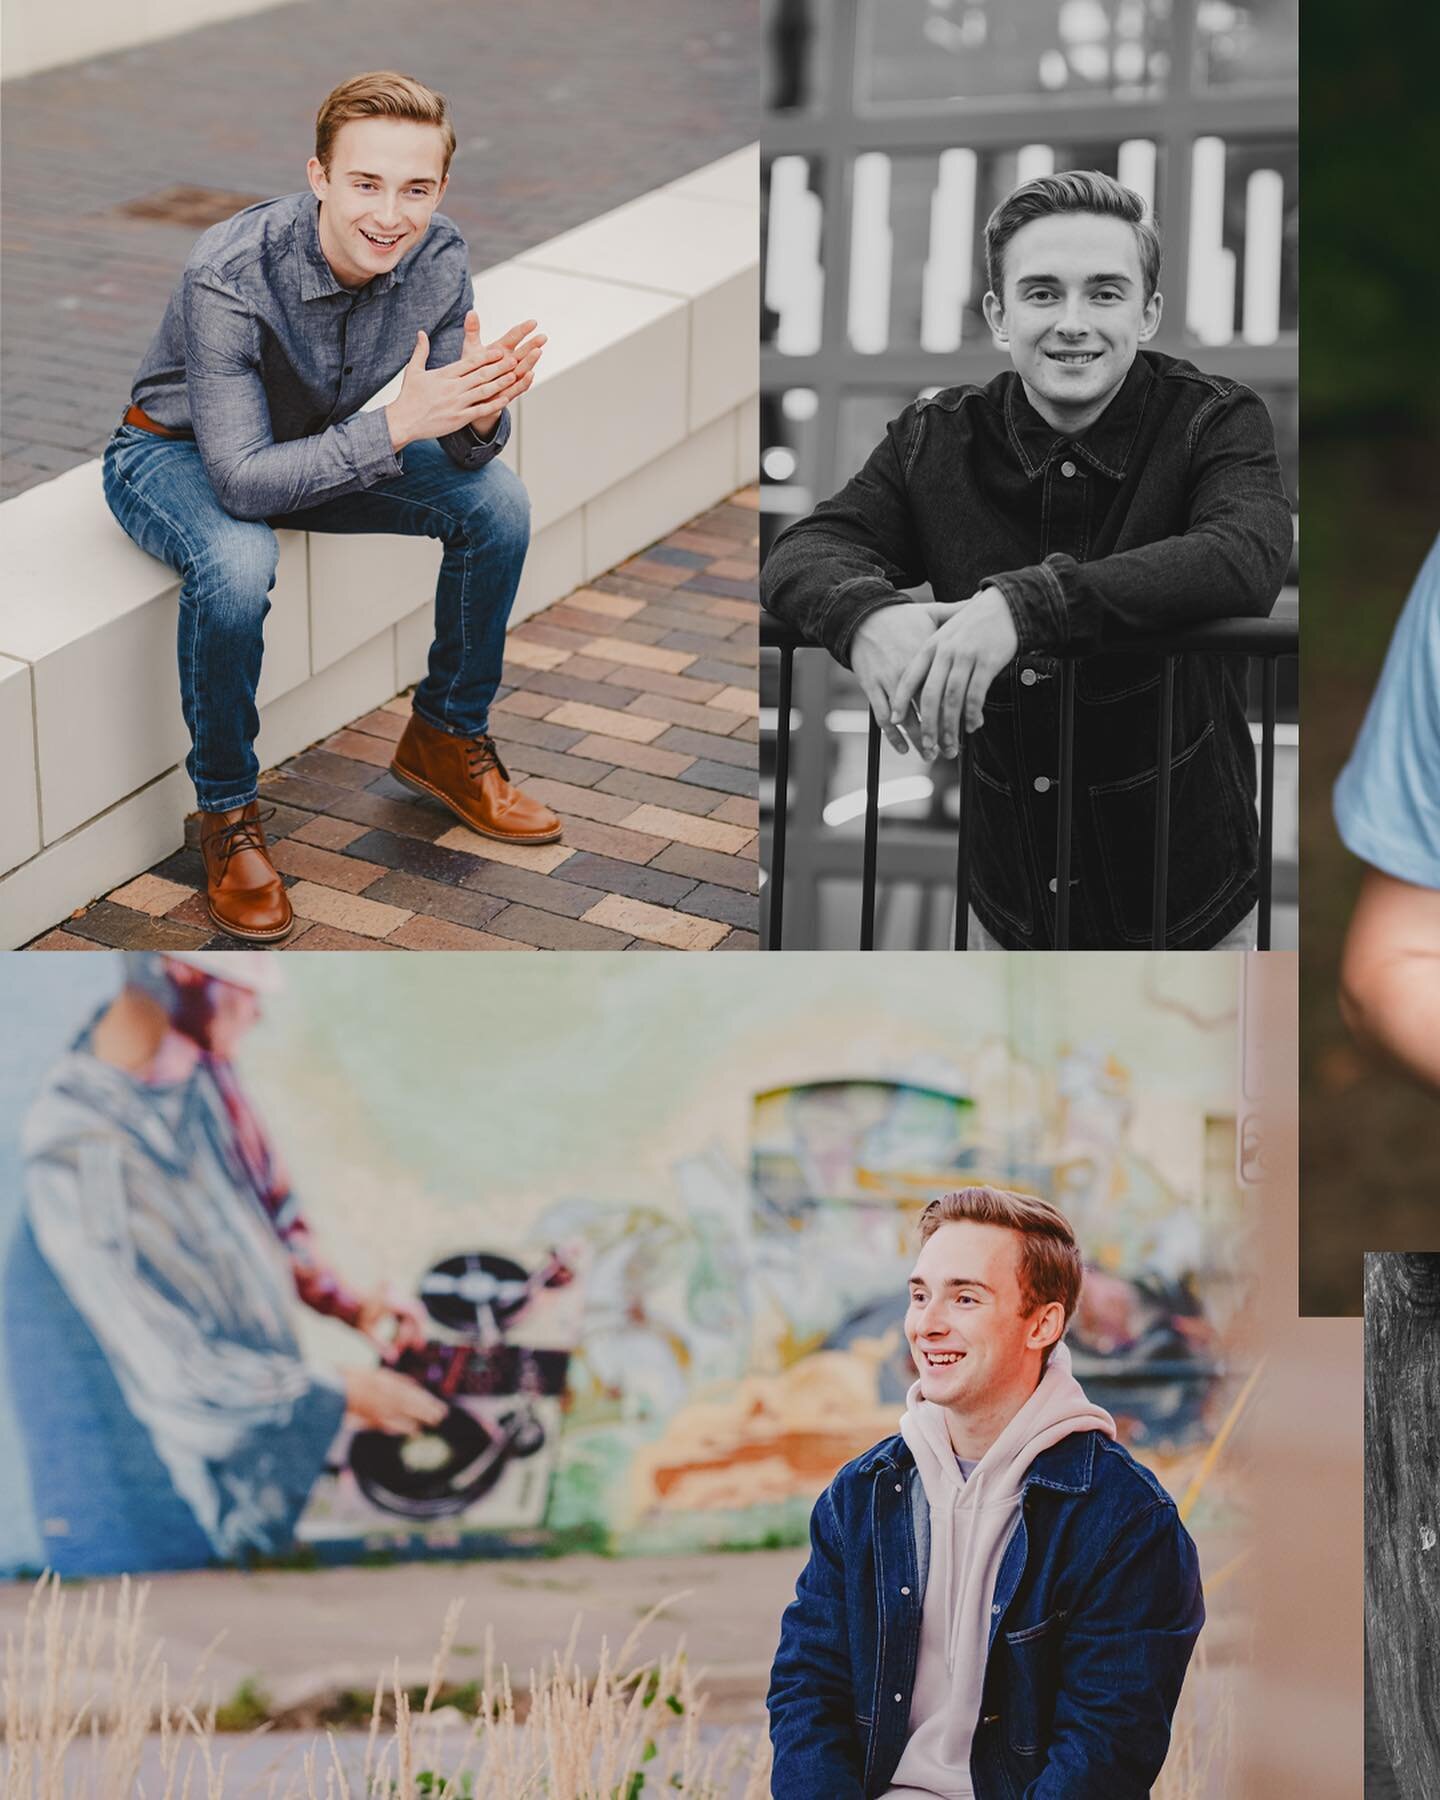 Calling all procrastinators! Graduation is coming up soon for the class of &lsquo;23 but there is still time to fit in a quick session. Message me to set something up before it&rsquo;s too late. 

(editor&rsquo;s note: none of these guys fall into th